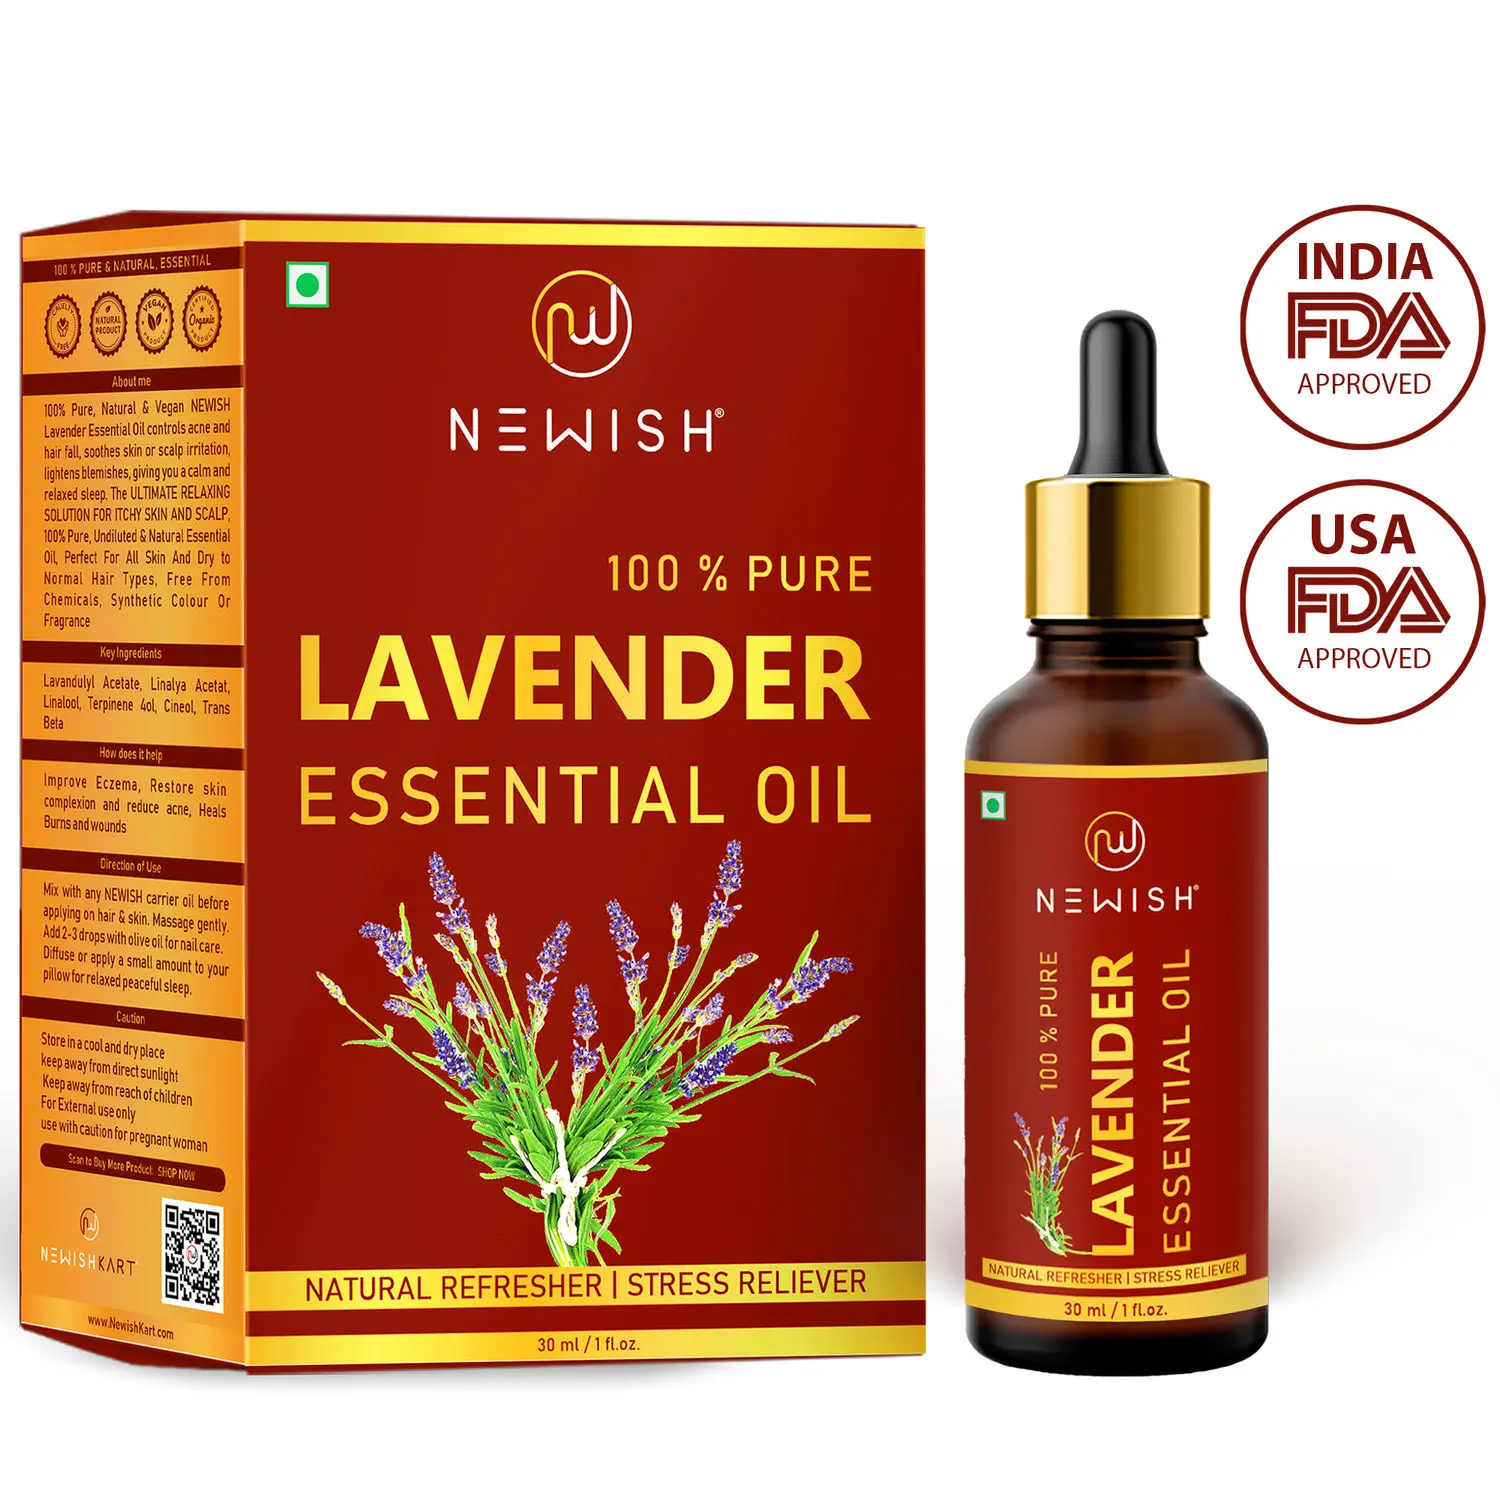 Newish Lavender 100 % Natural Essential Oil Therapeutic Grade For Skin Hair And Acne Care& Diffuser 30ml